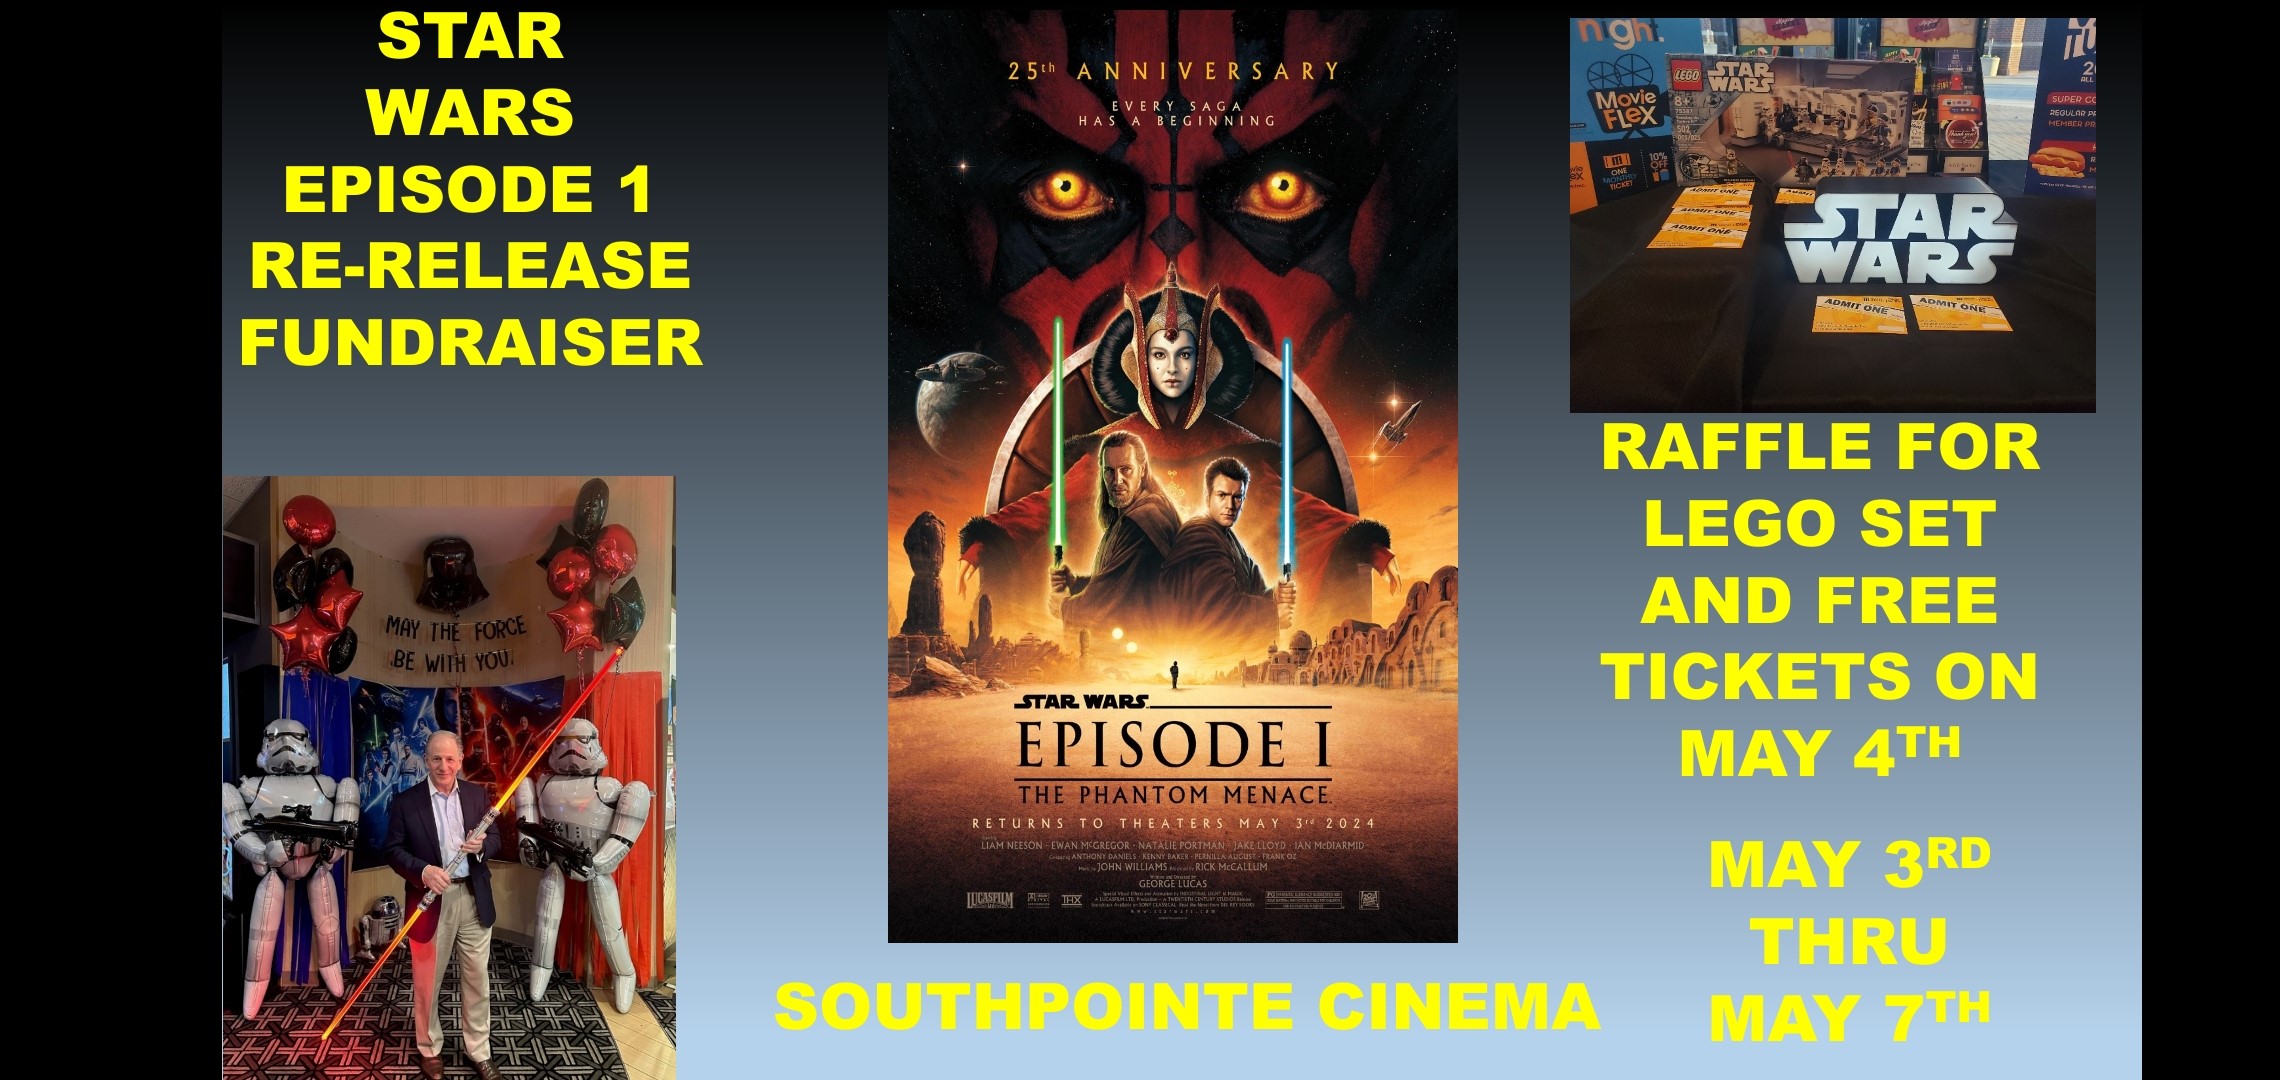 Star Wars Episode 1 Re- Release Fundraiser at SouthPointe Pavilions Cinema Benefitting Capital Humane Society